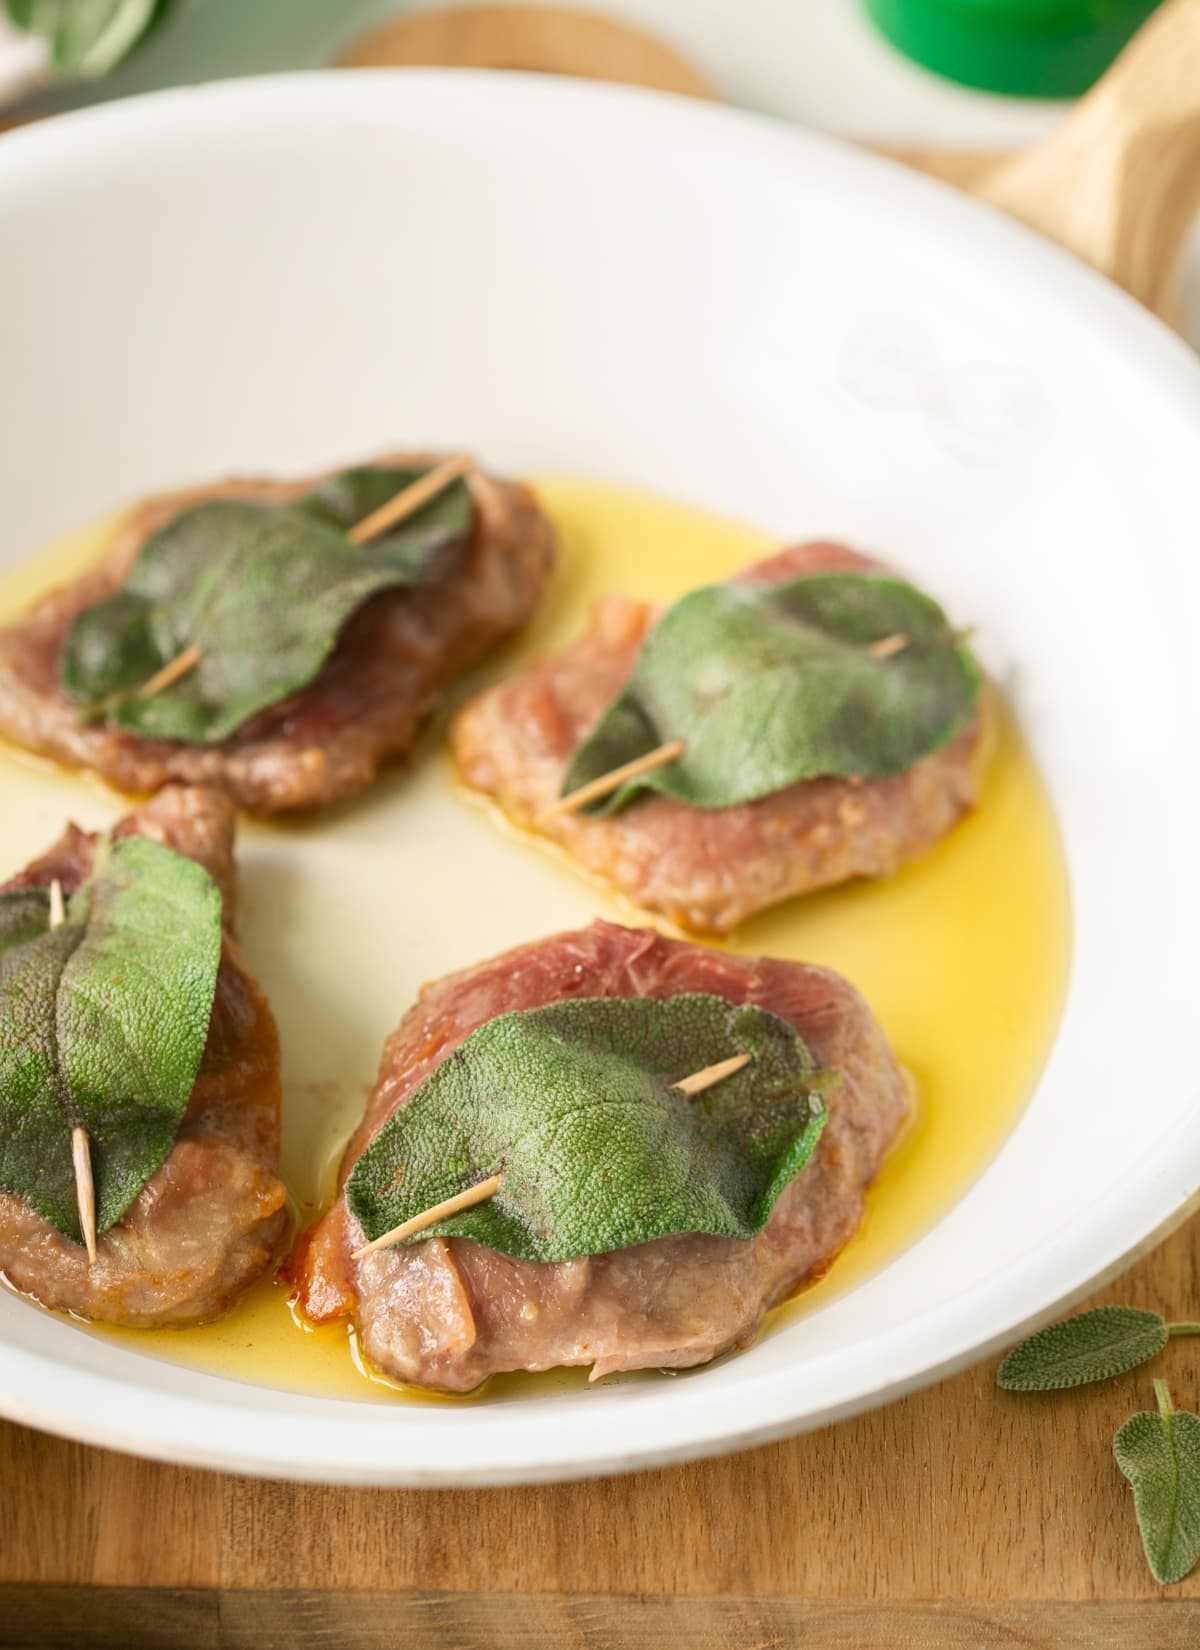 saltimbocca alla romana, made with veal cutlets, prosciutto and sage.